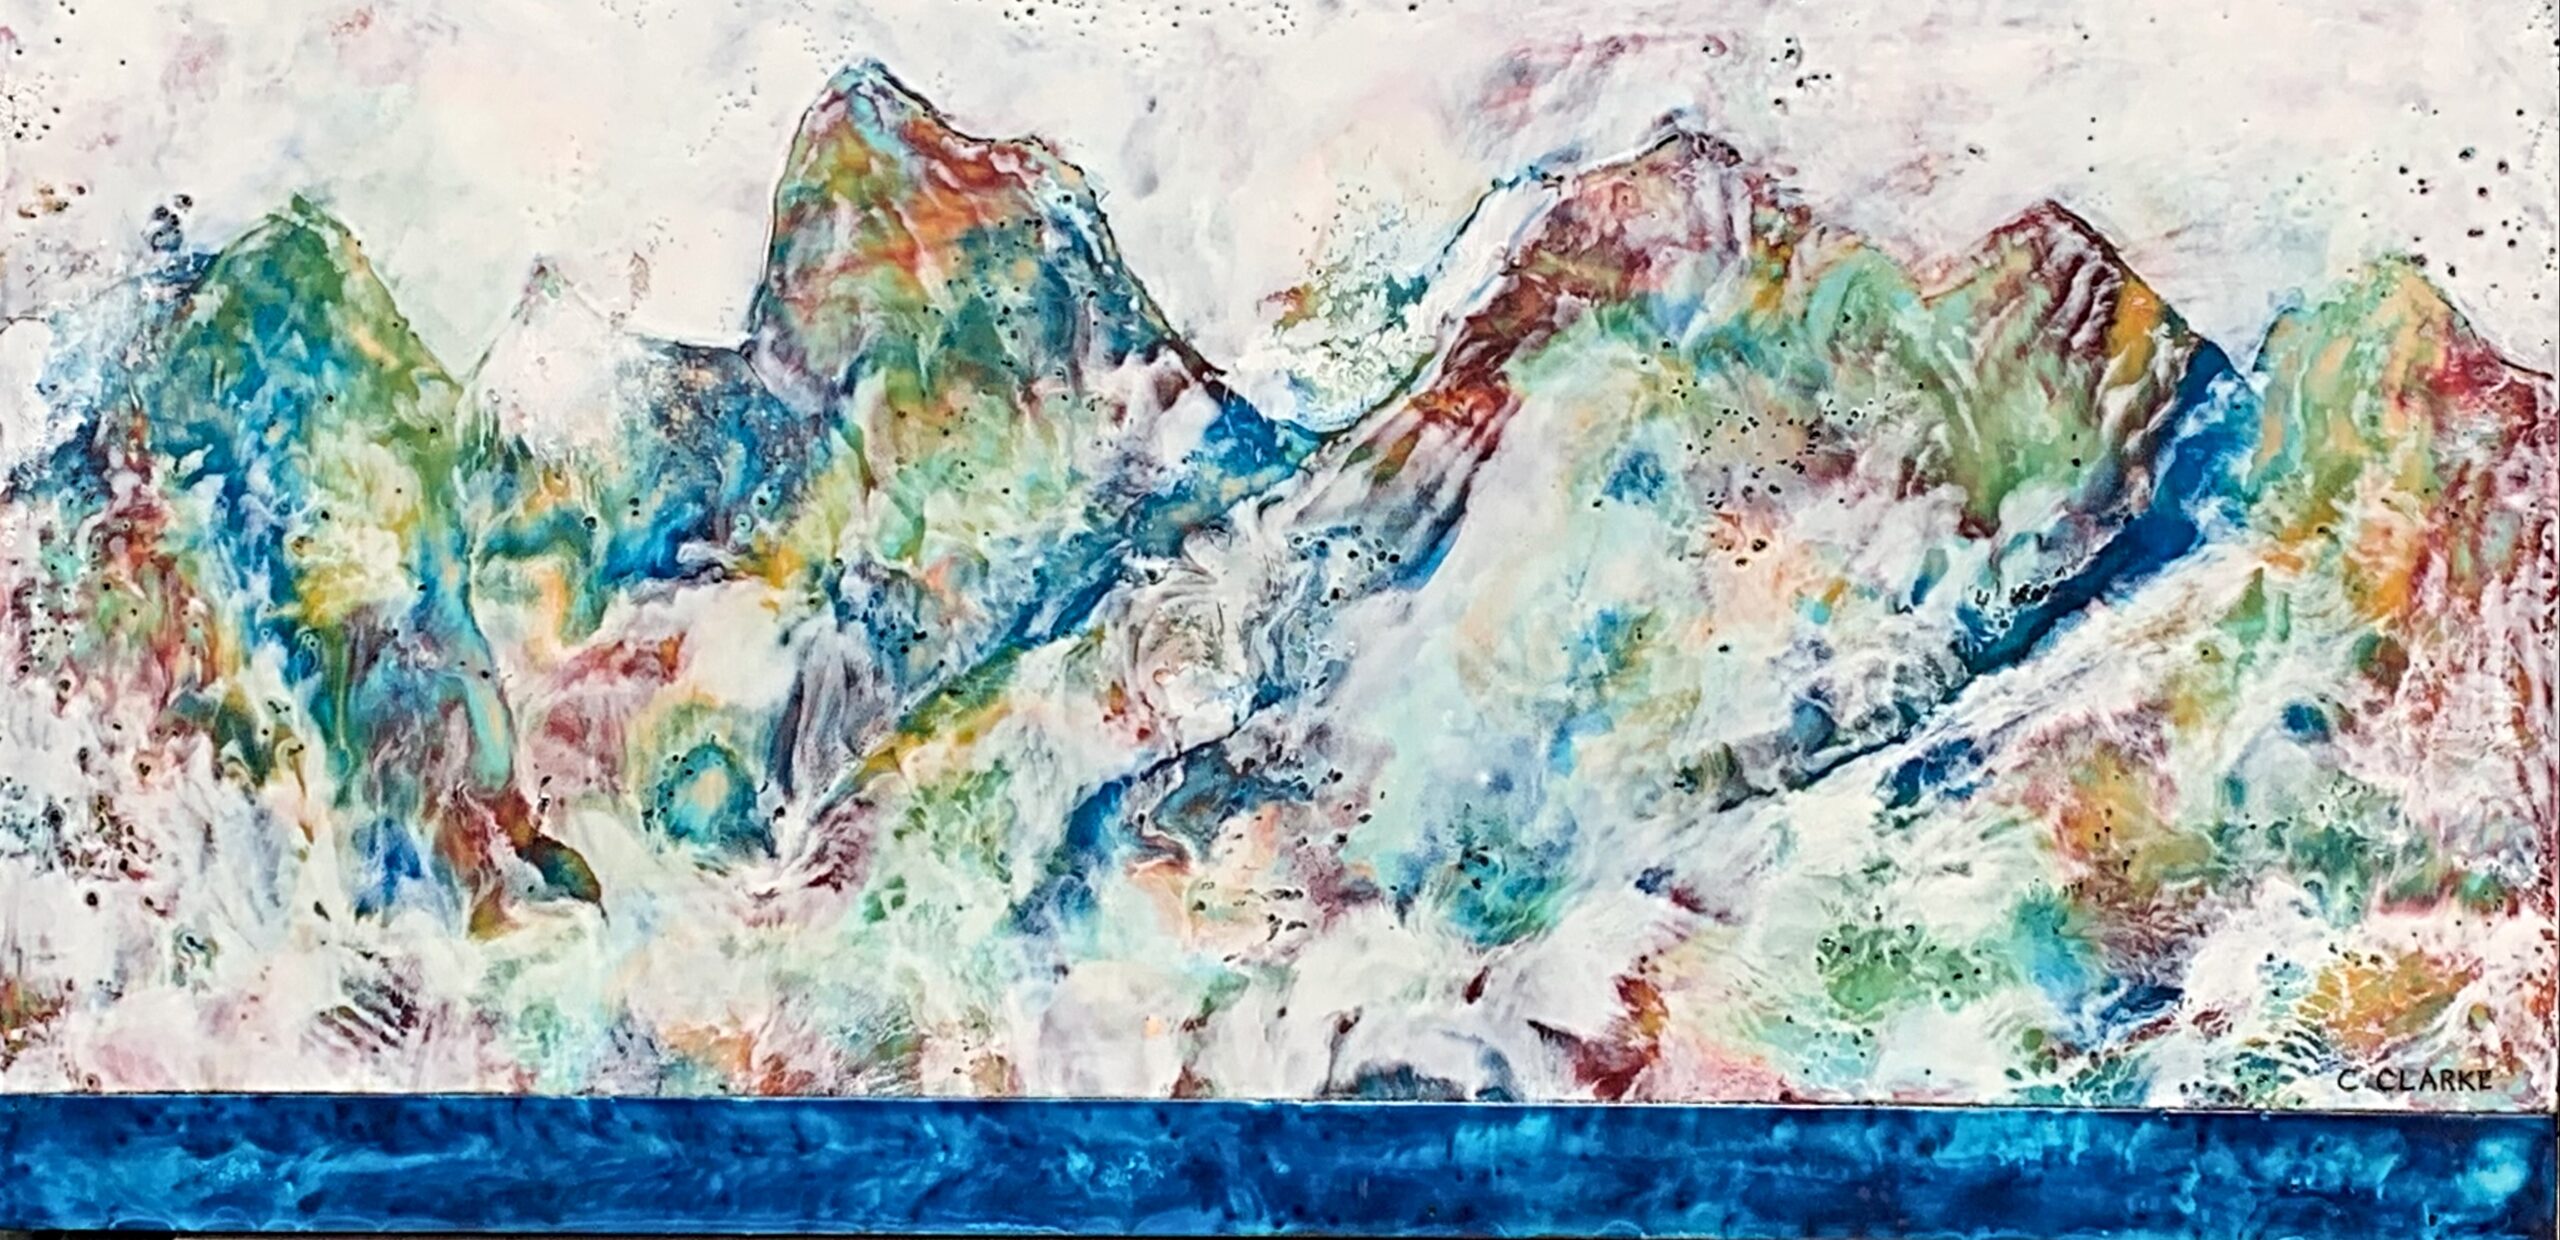 Rising Peaks, encaustic landscape painting by Catharine Clarke | Effusion Art Gallery + Cast Glass Studio, Invermere BC